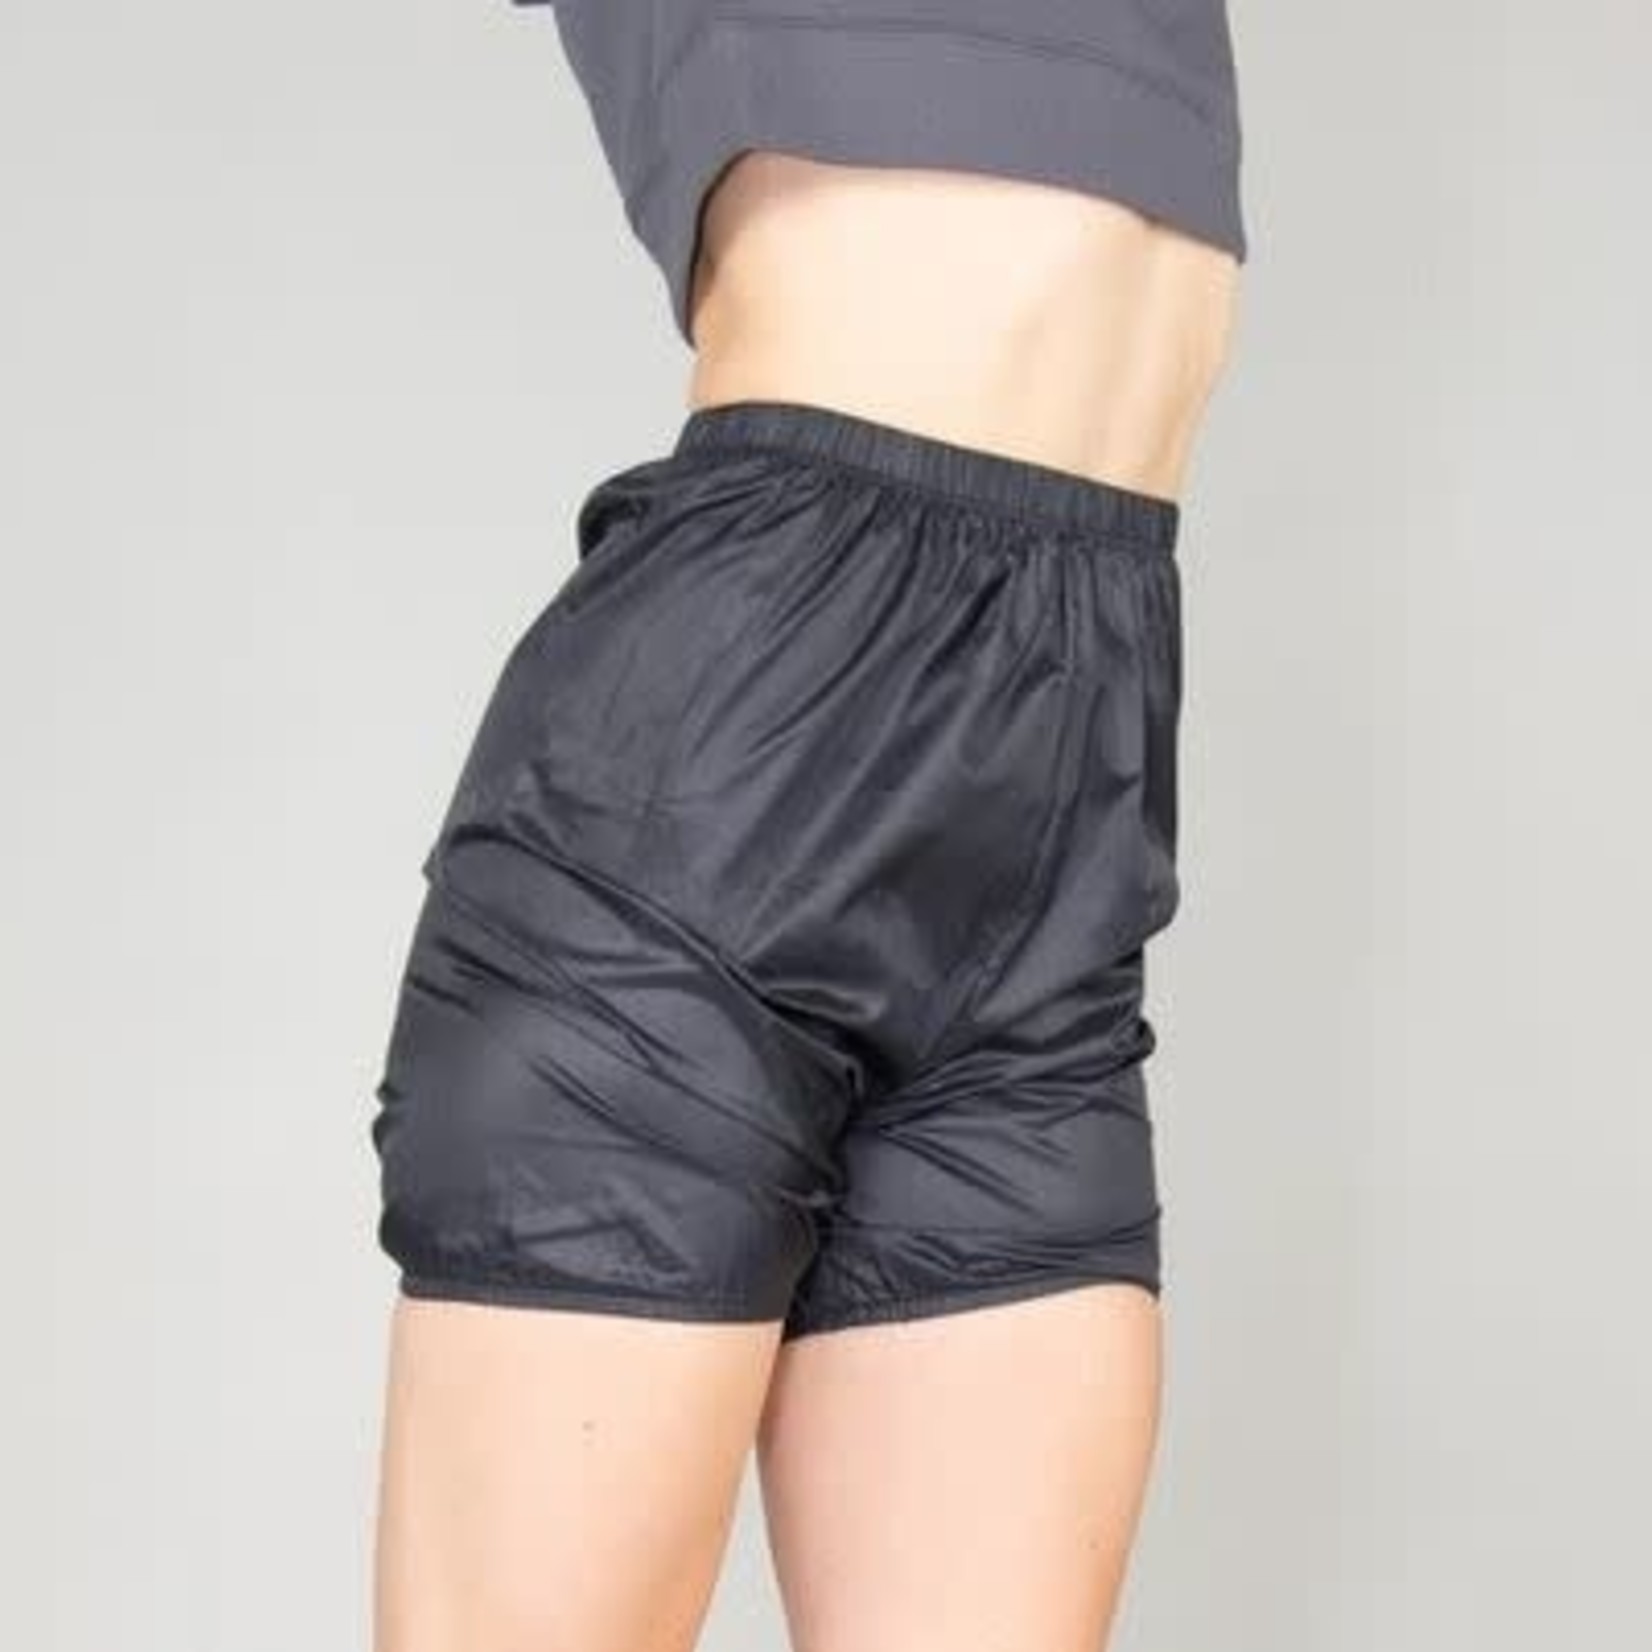 Body Wrappers 746 Adult Warm-up Bloomers Shorts - MK Dancewear